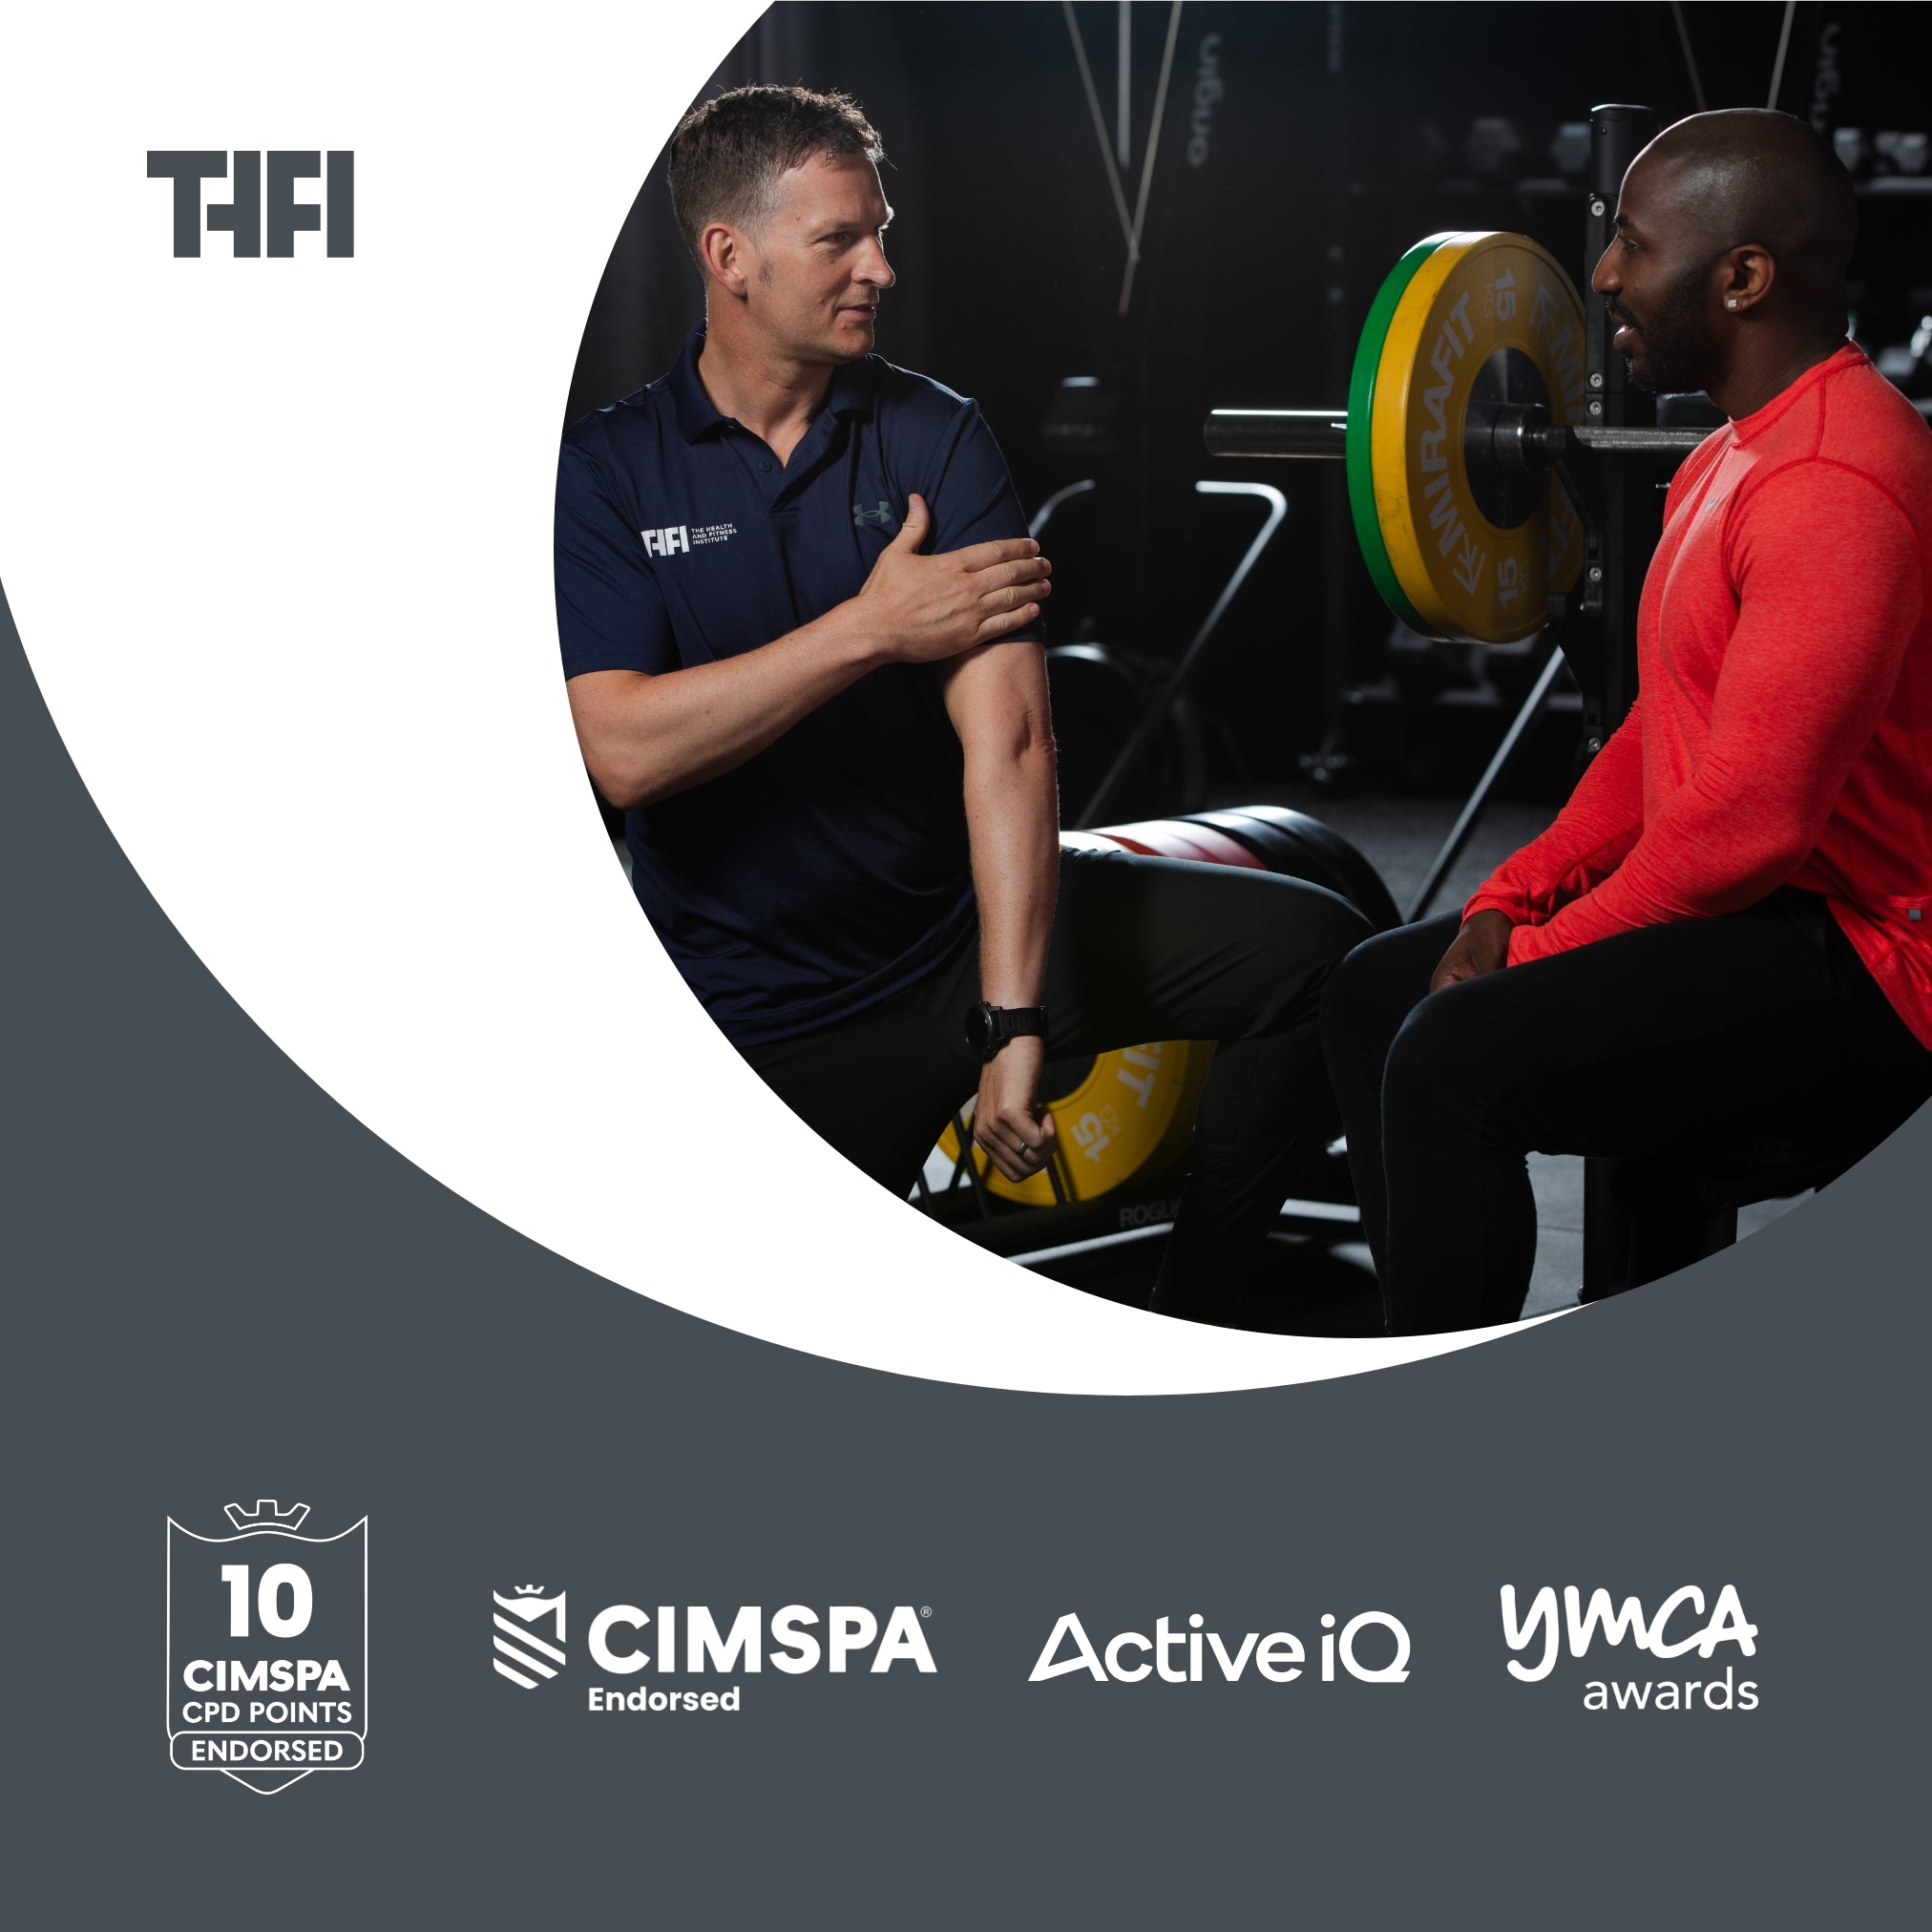 Level 4 Strength and Conditioning Coach